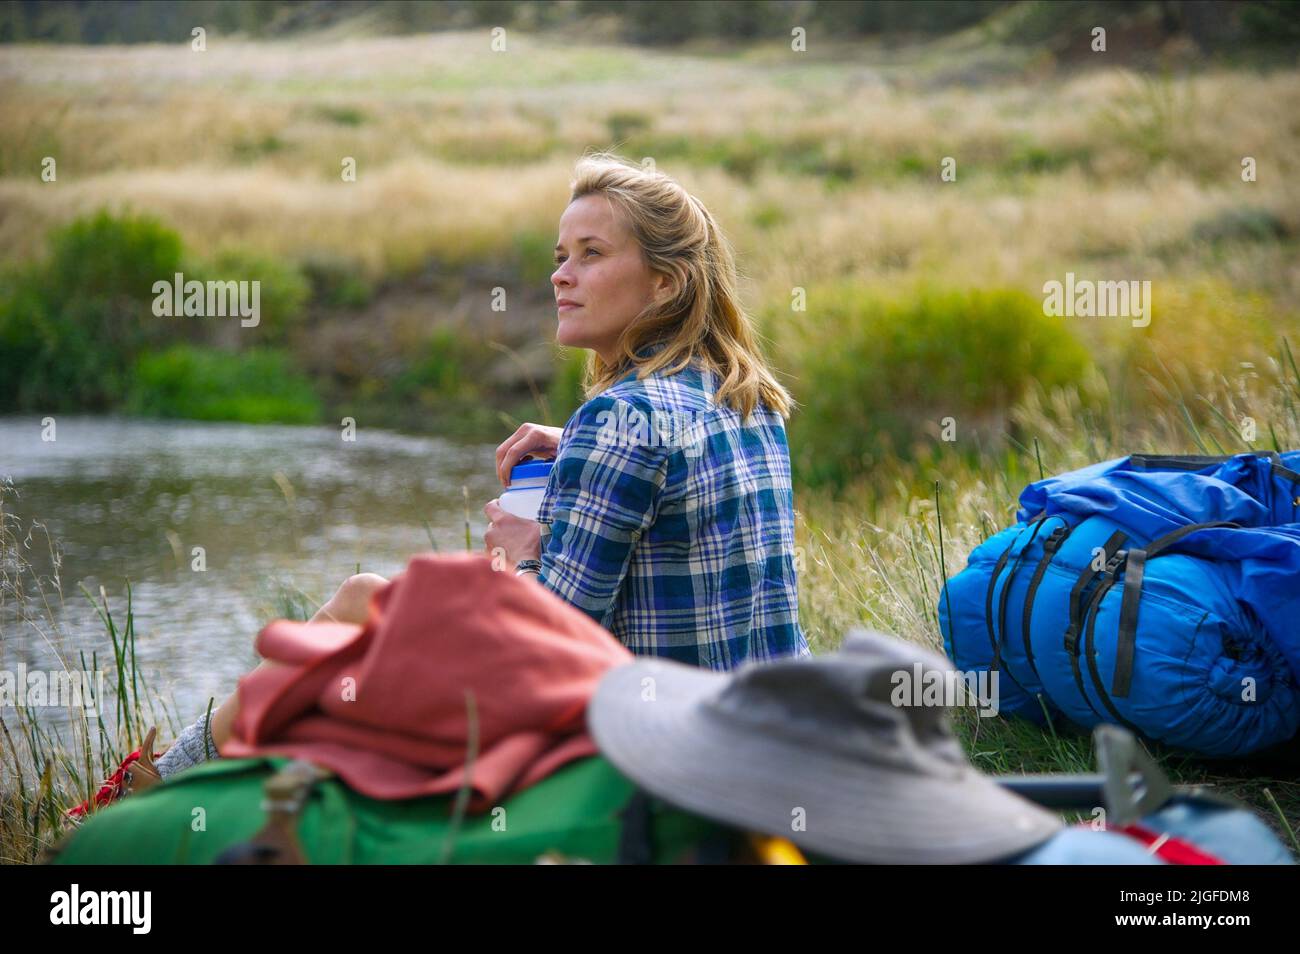 REESE WITHERSPOON, sauvage, 2014 Banque D'Images